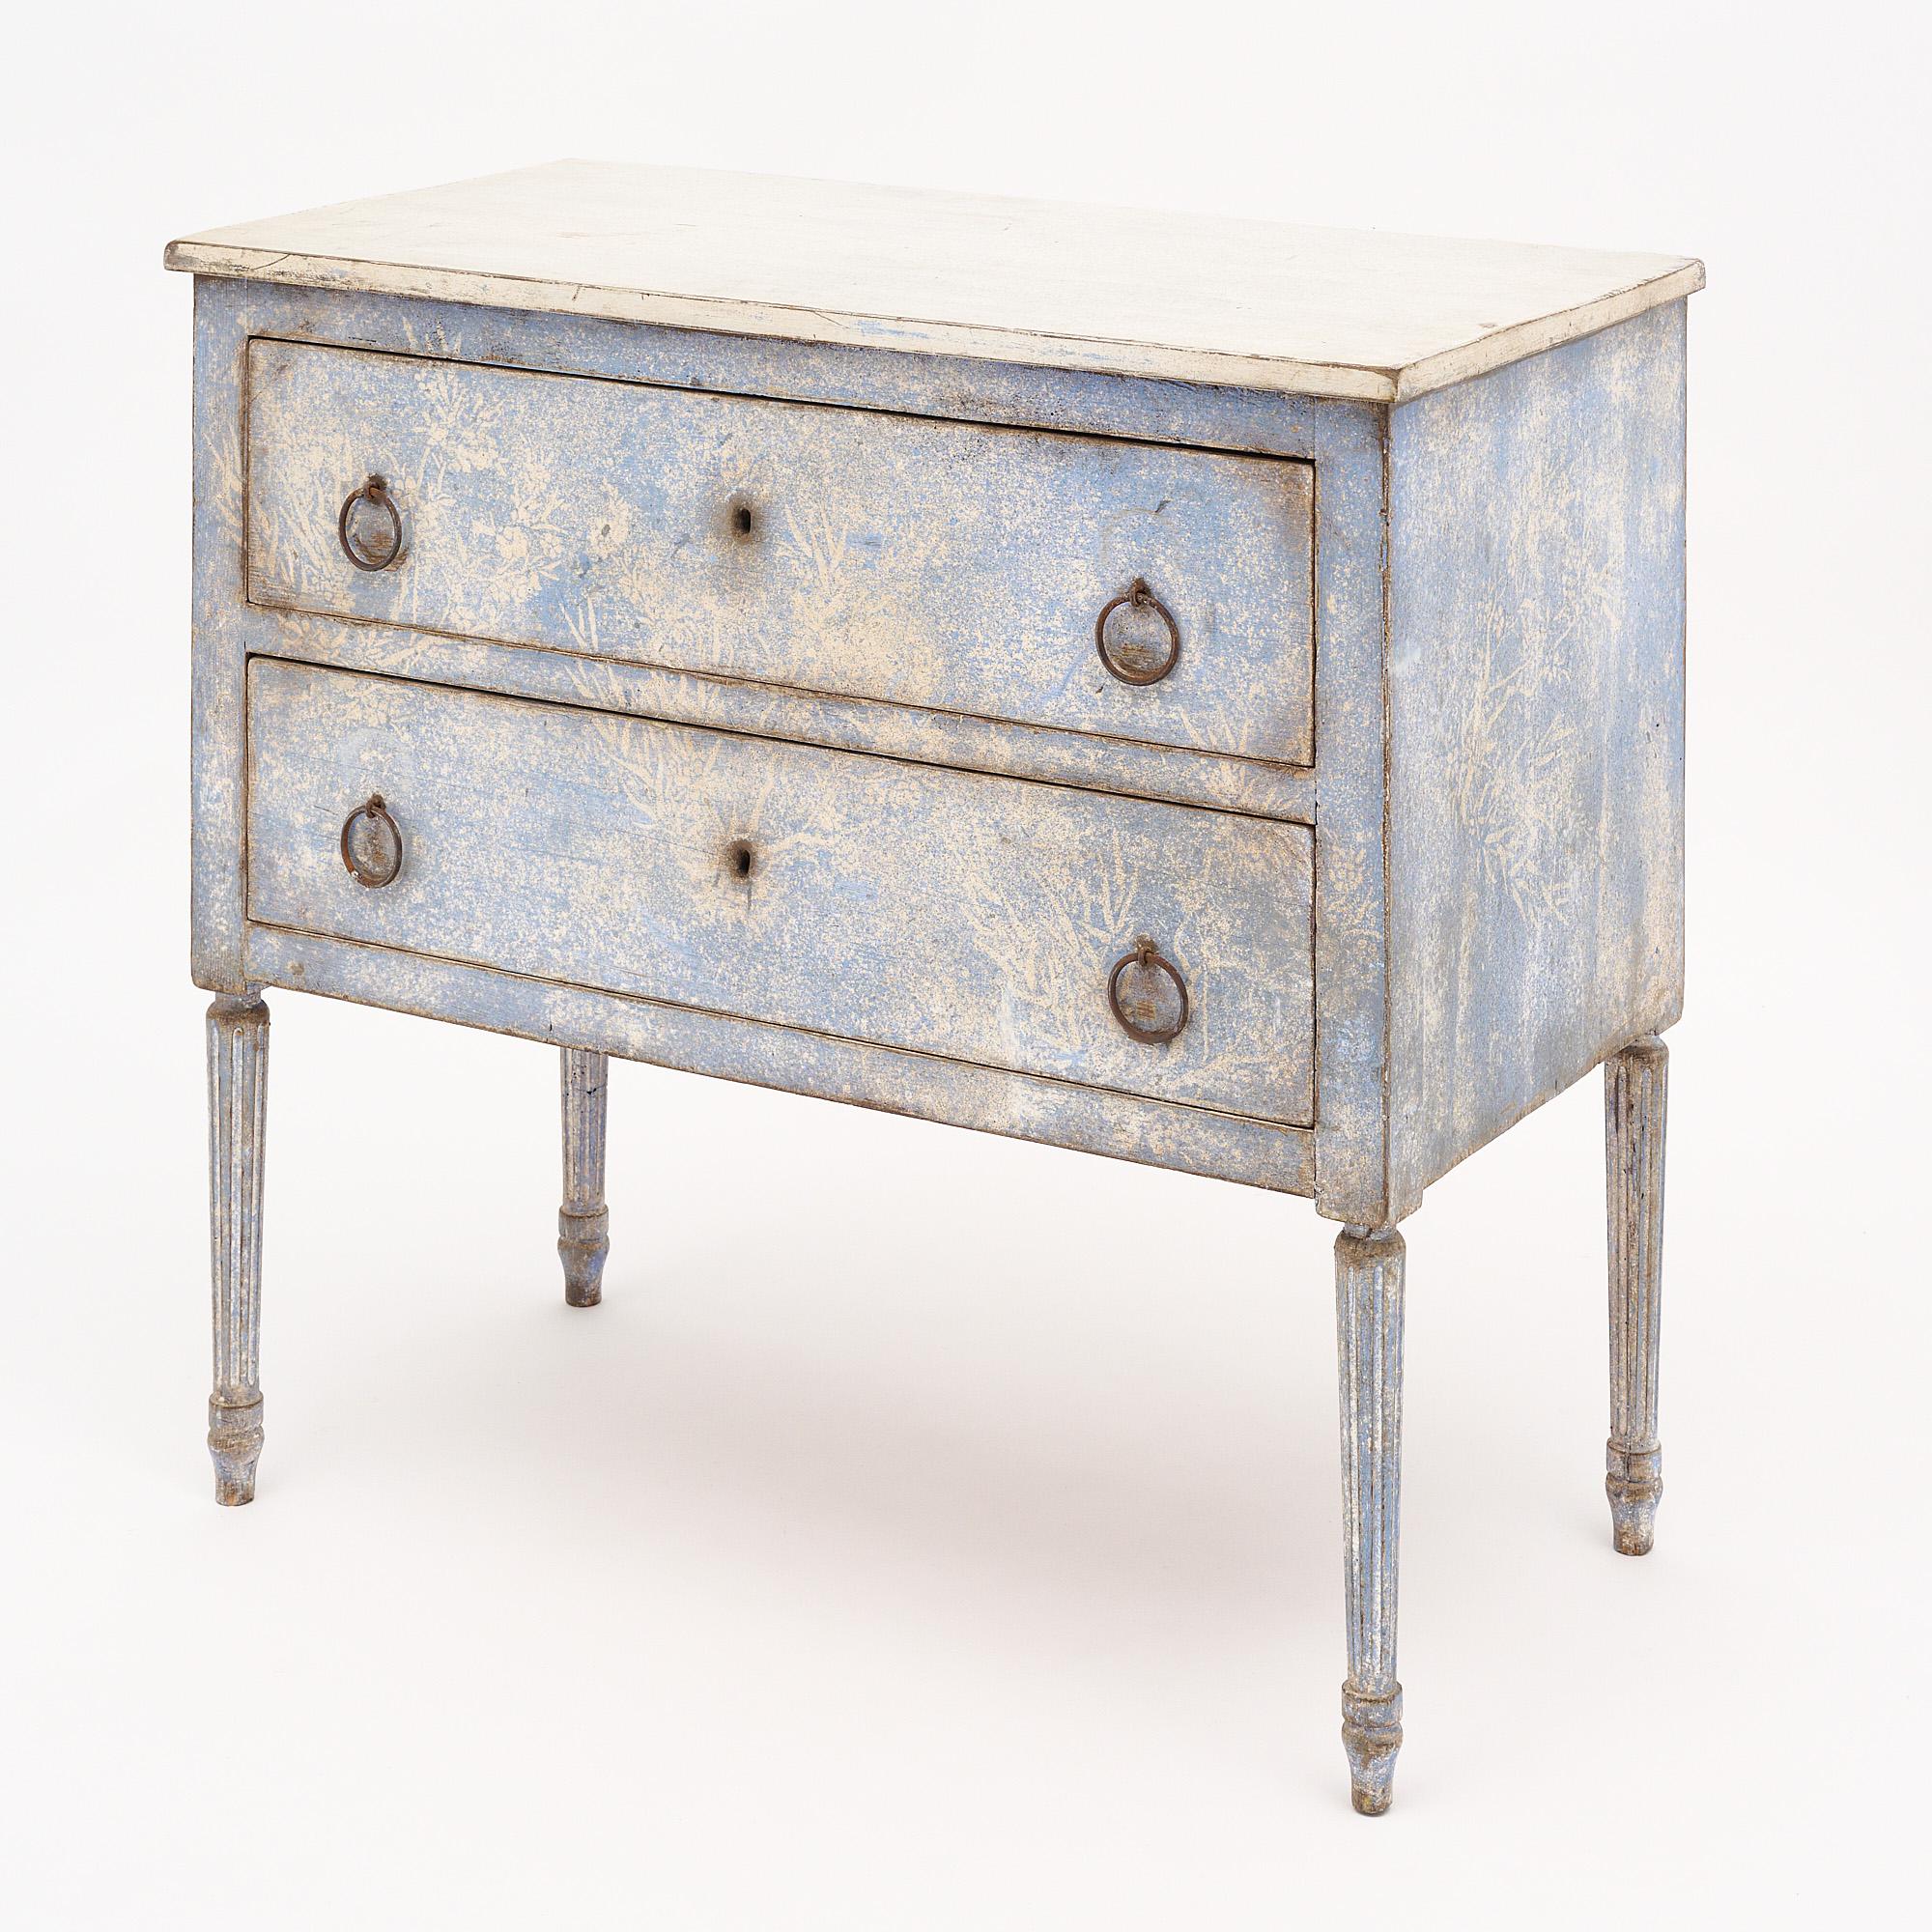 Italian chest with striking hand-painted design in cream and blue tones, supported by four fluted and tapered legs. The chest features two dovetailed drawers with original hardware. We love the delicate floral motif. This chest would be perfect for